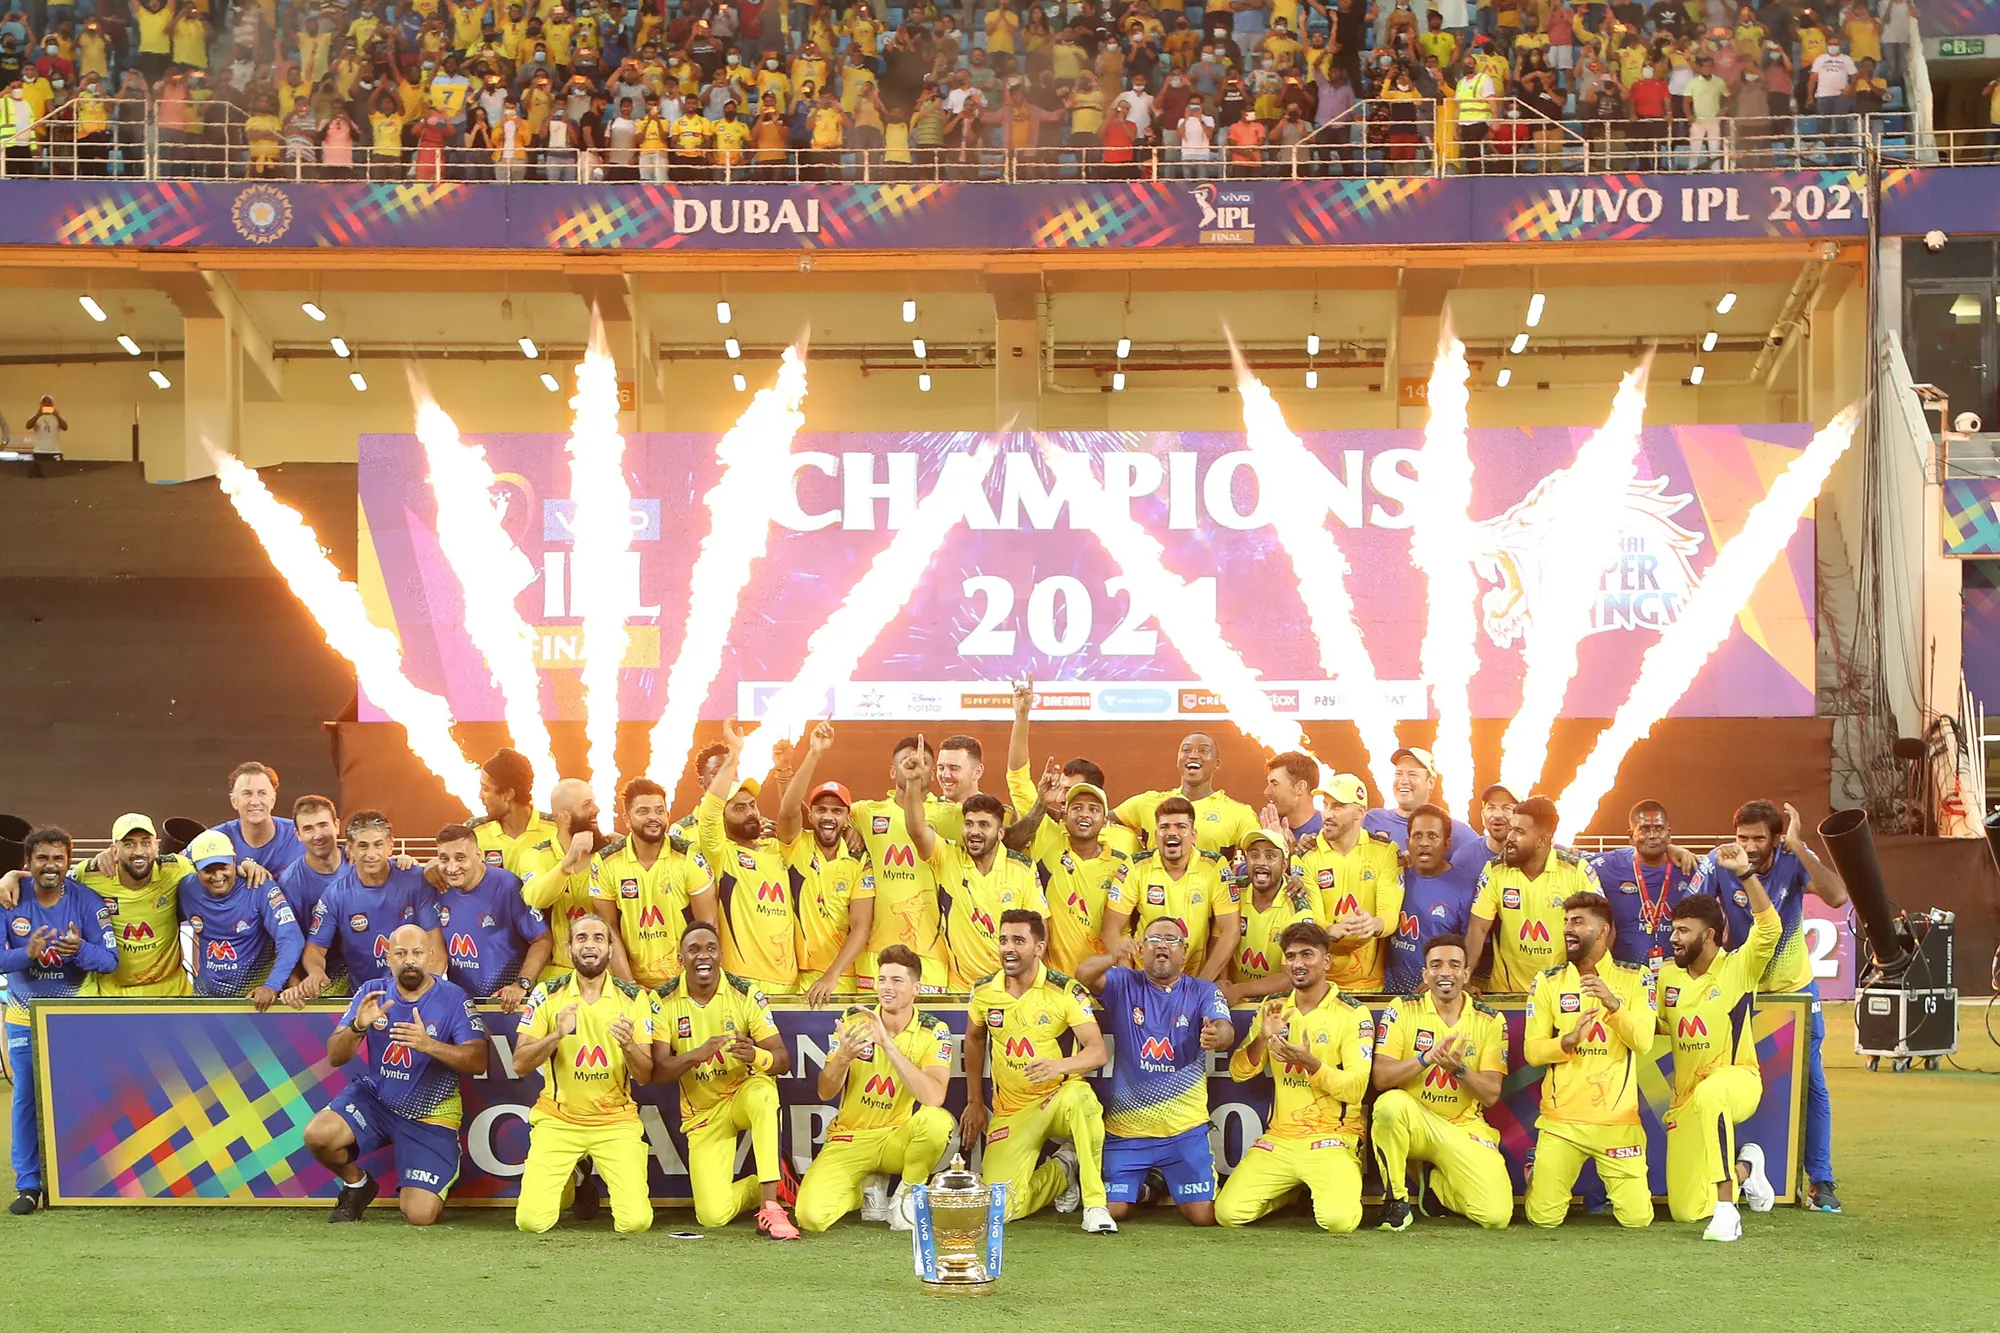 CSK win fourth IPL title beating KKR by 27 runs